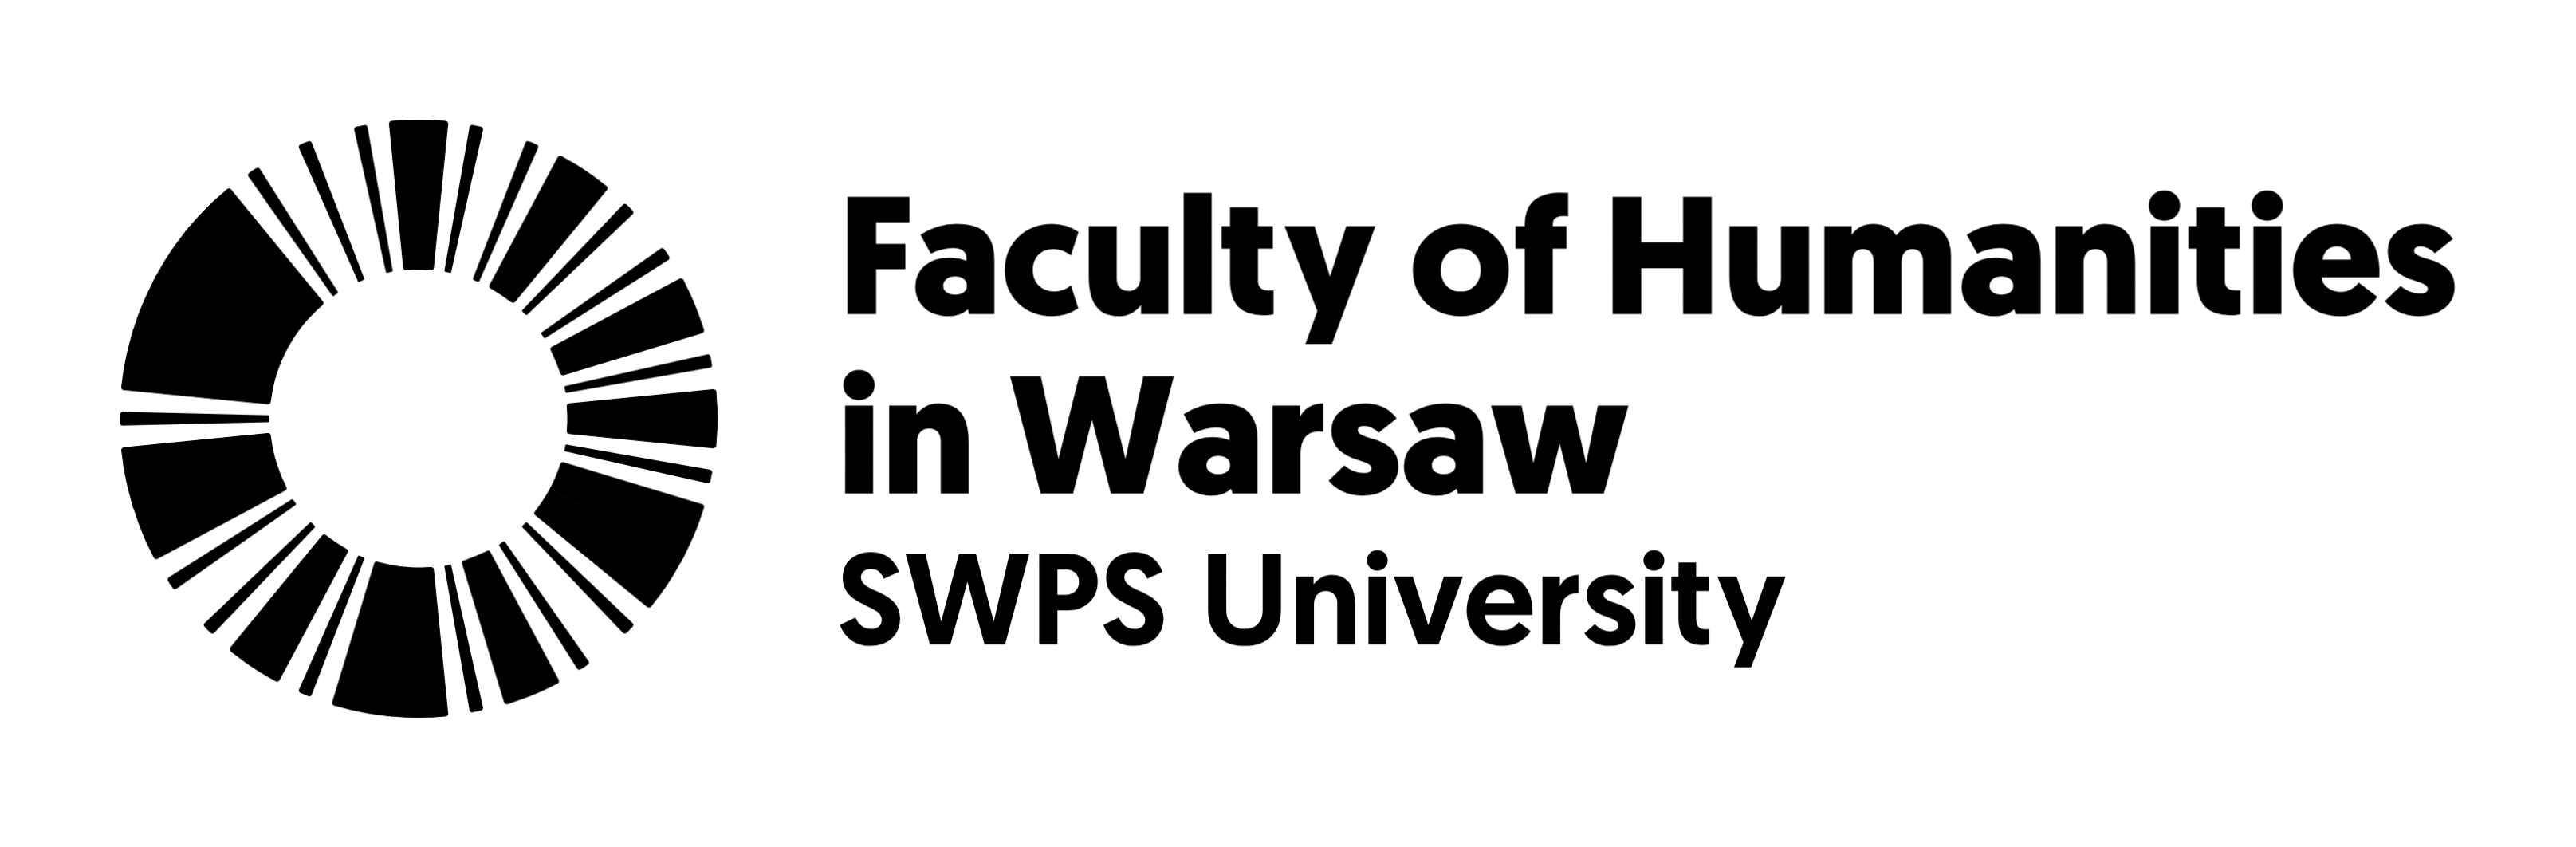 SWPS University Faculty of Humanities